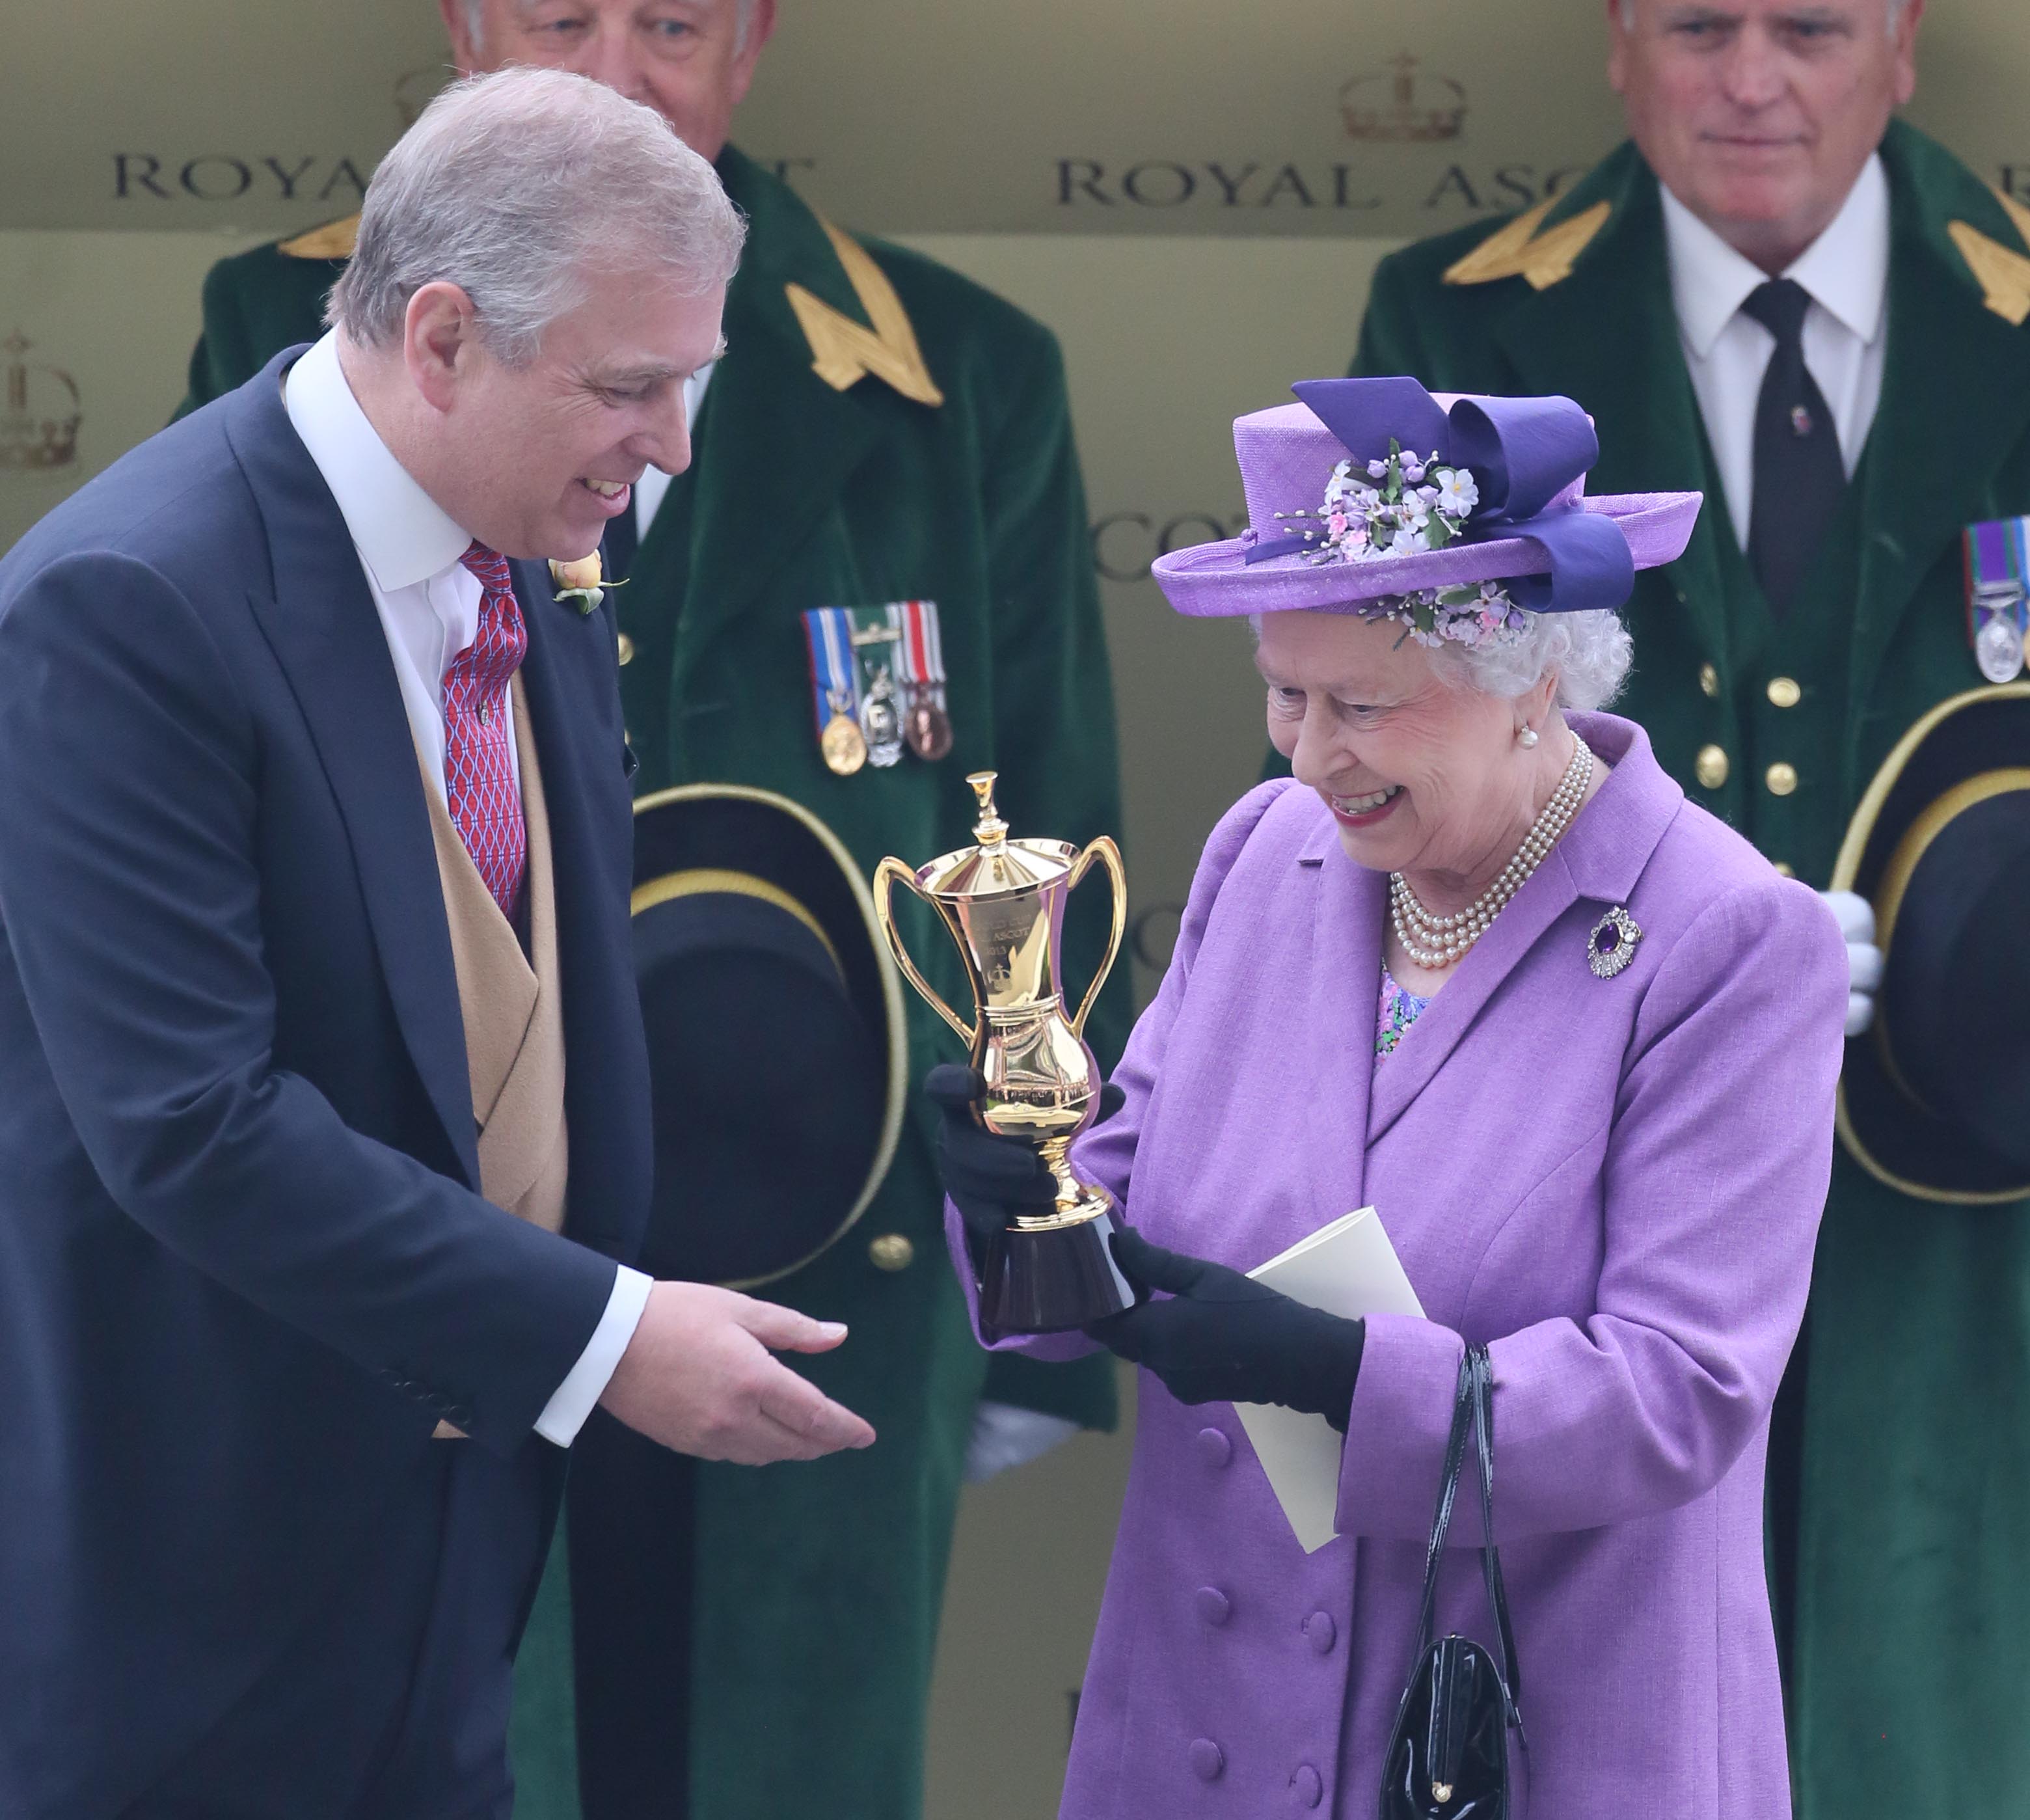 , Queen’s legacy in horse racing will last for years to come, says her trusted trainer as nation bids final goodbye